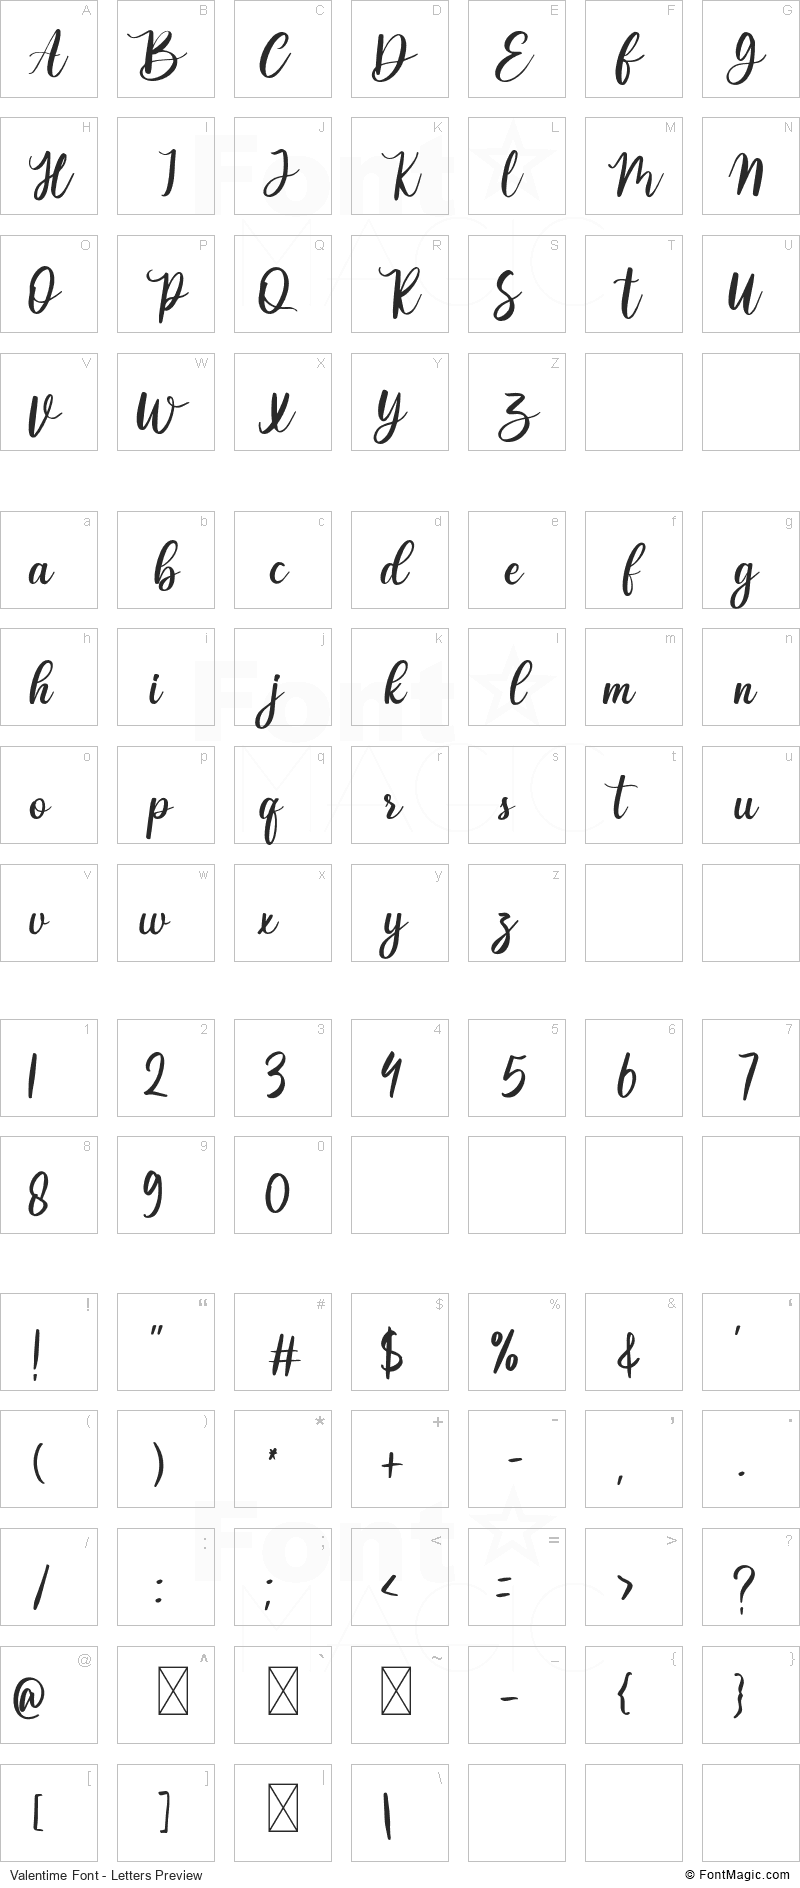 Valentime Font - All Latters Preview Chart